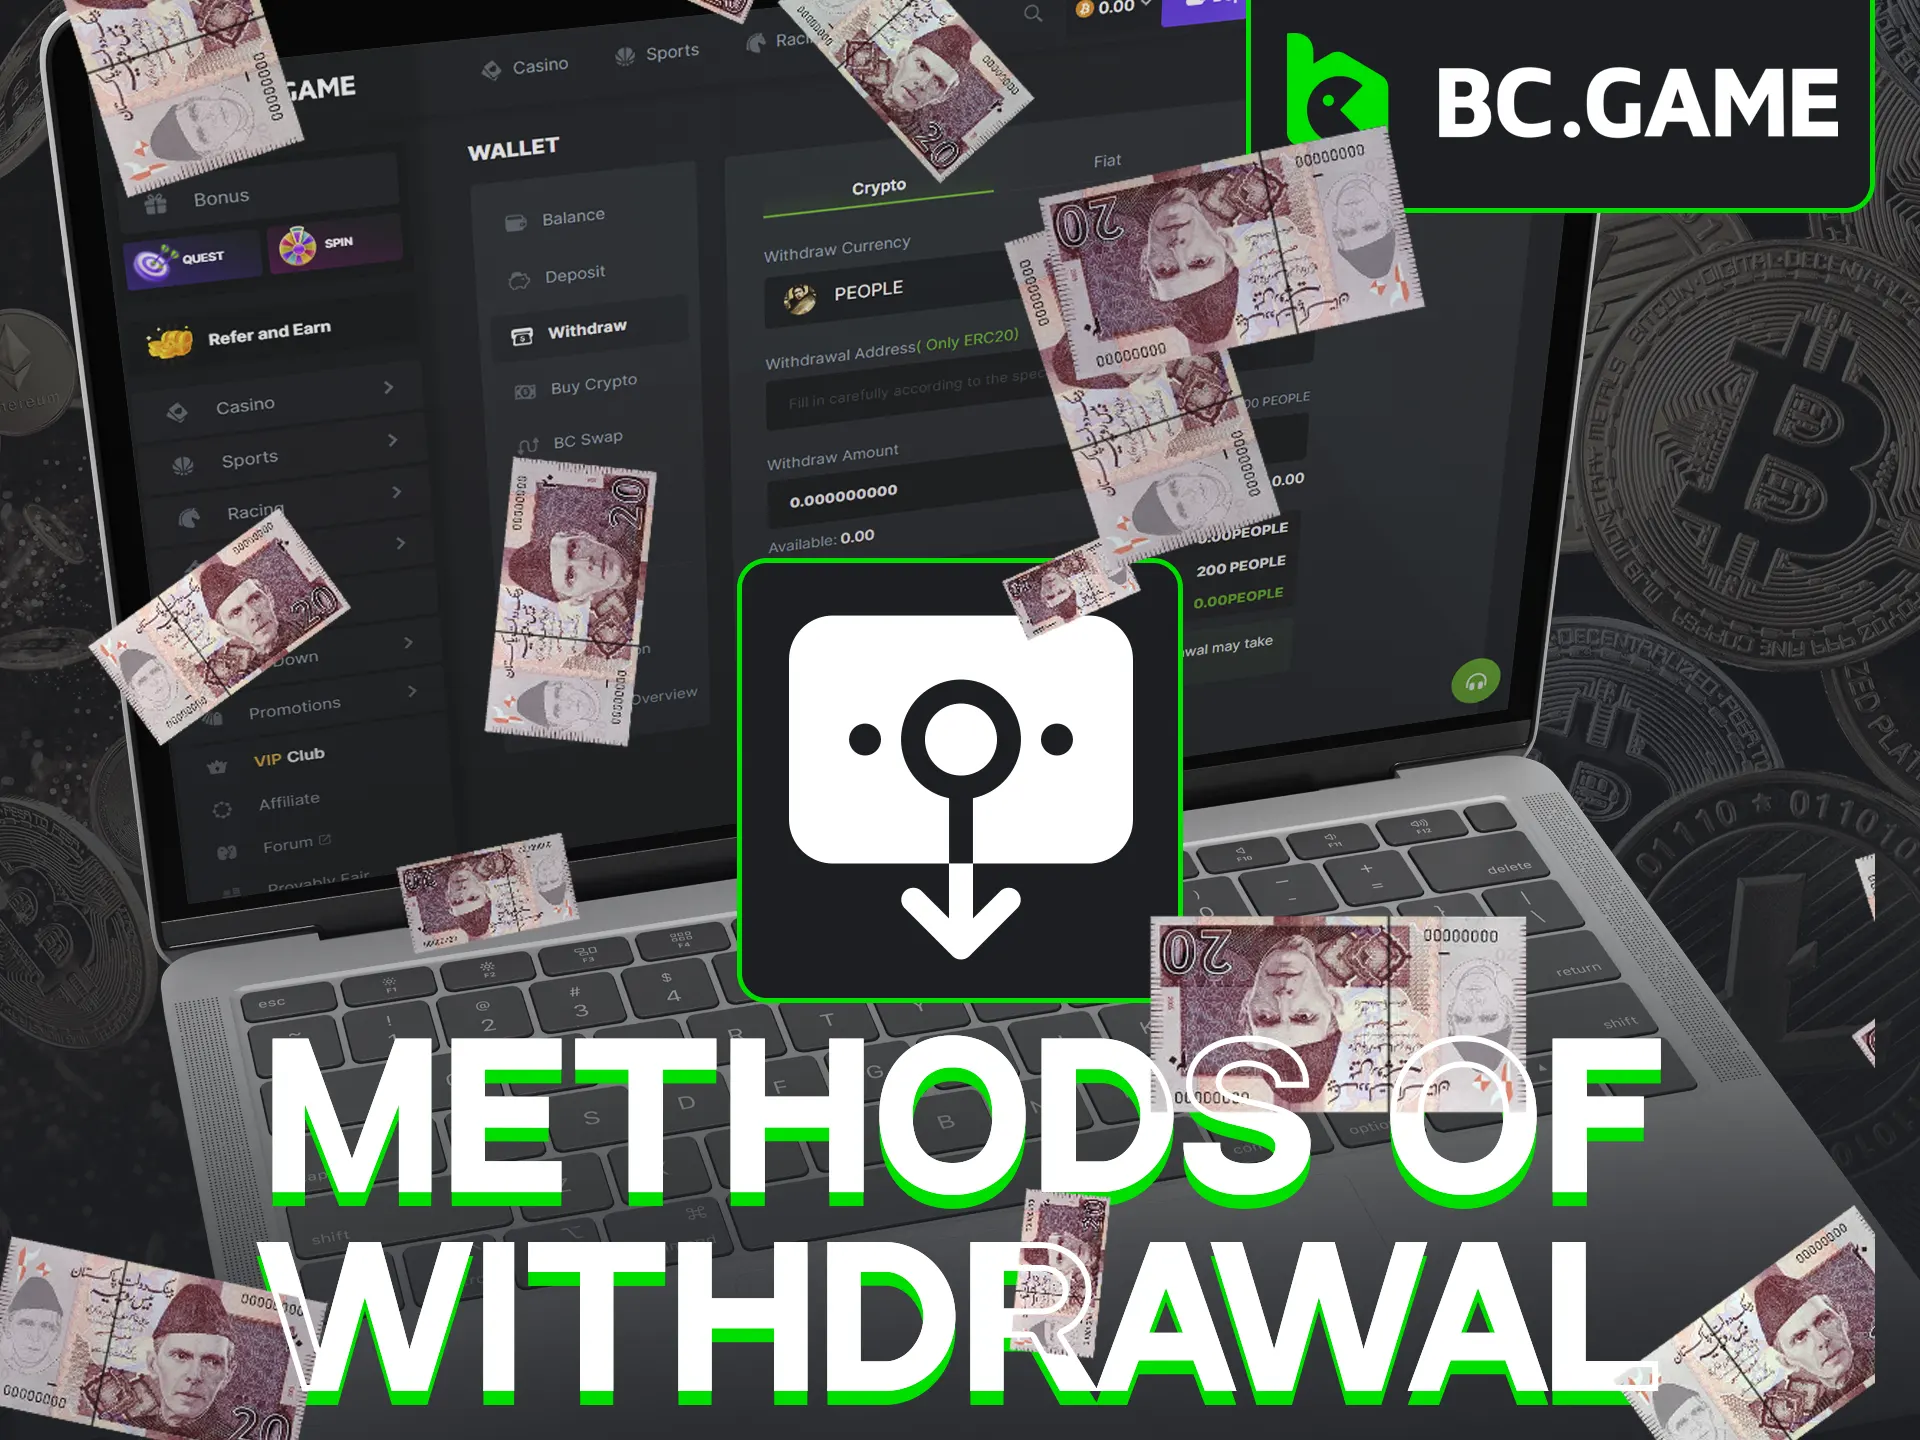 Learn more about withdrawal methods at BC Game.